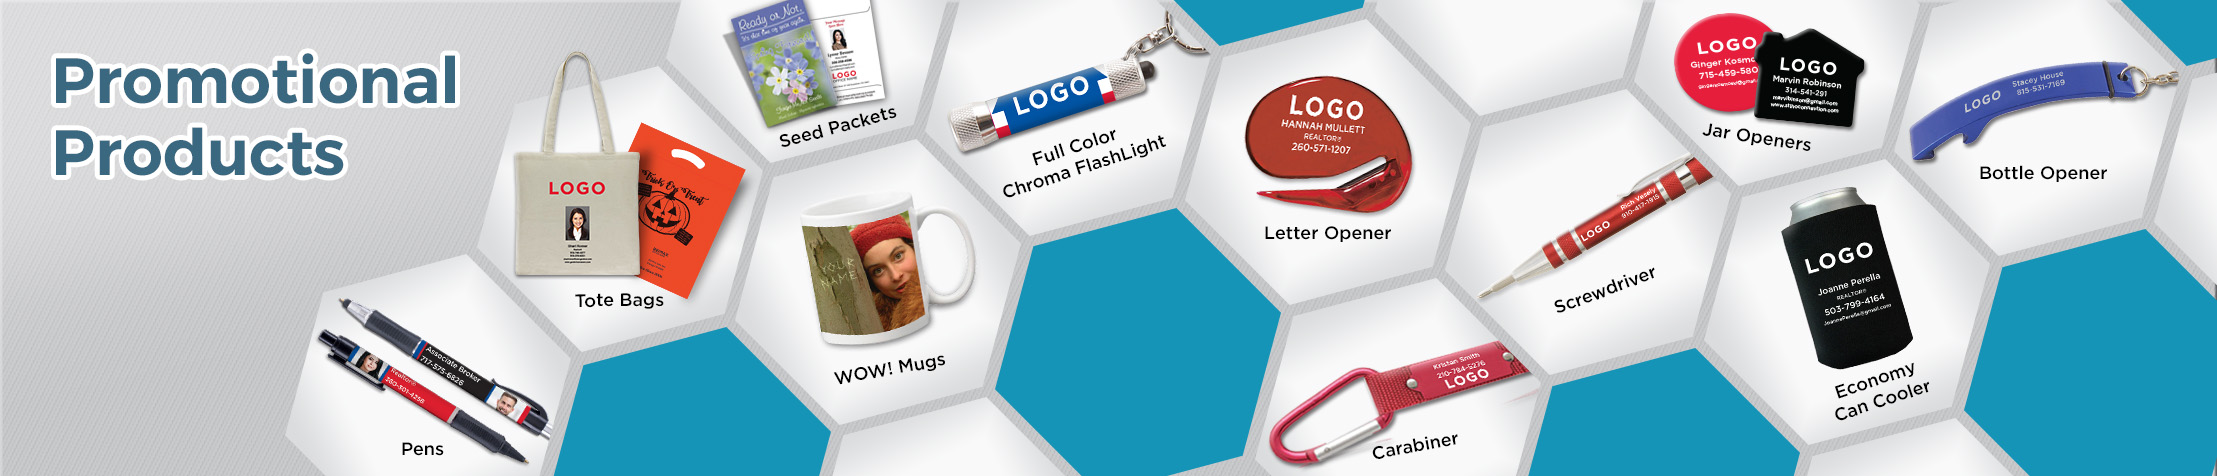 RE/MAX Real Estate Promotional Products - RE/MAX  personalized promotional pens, key chains, tote bags, flashlights, mugs | BestPrintBuy.com